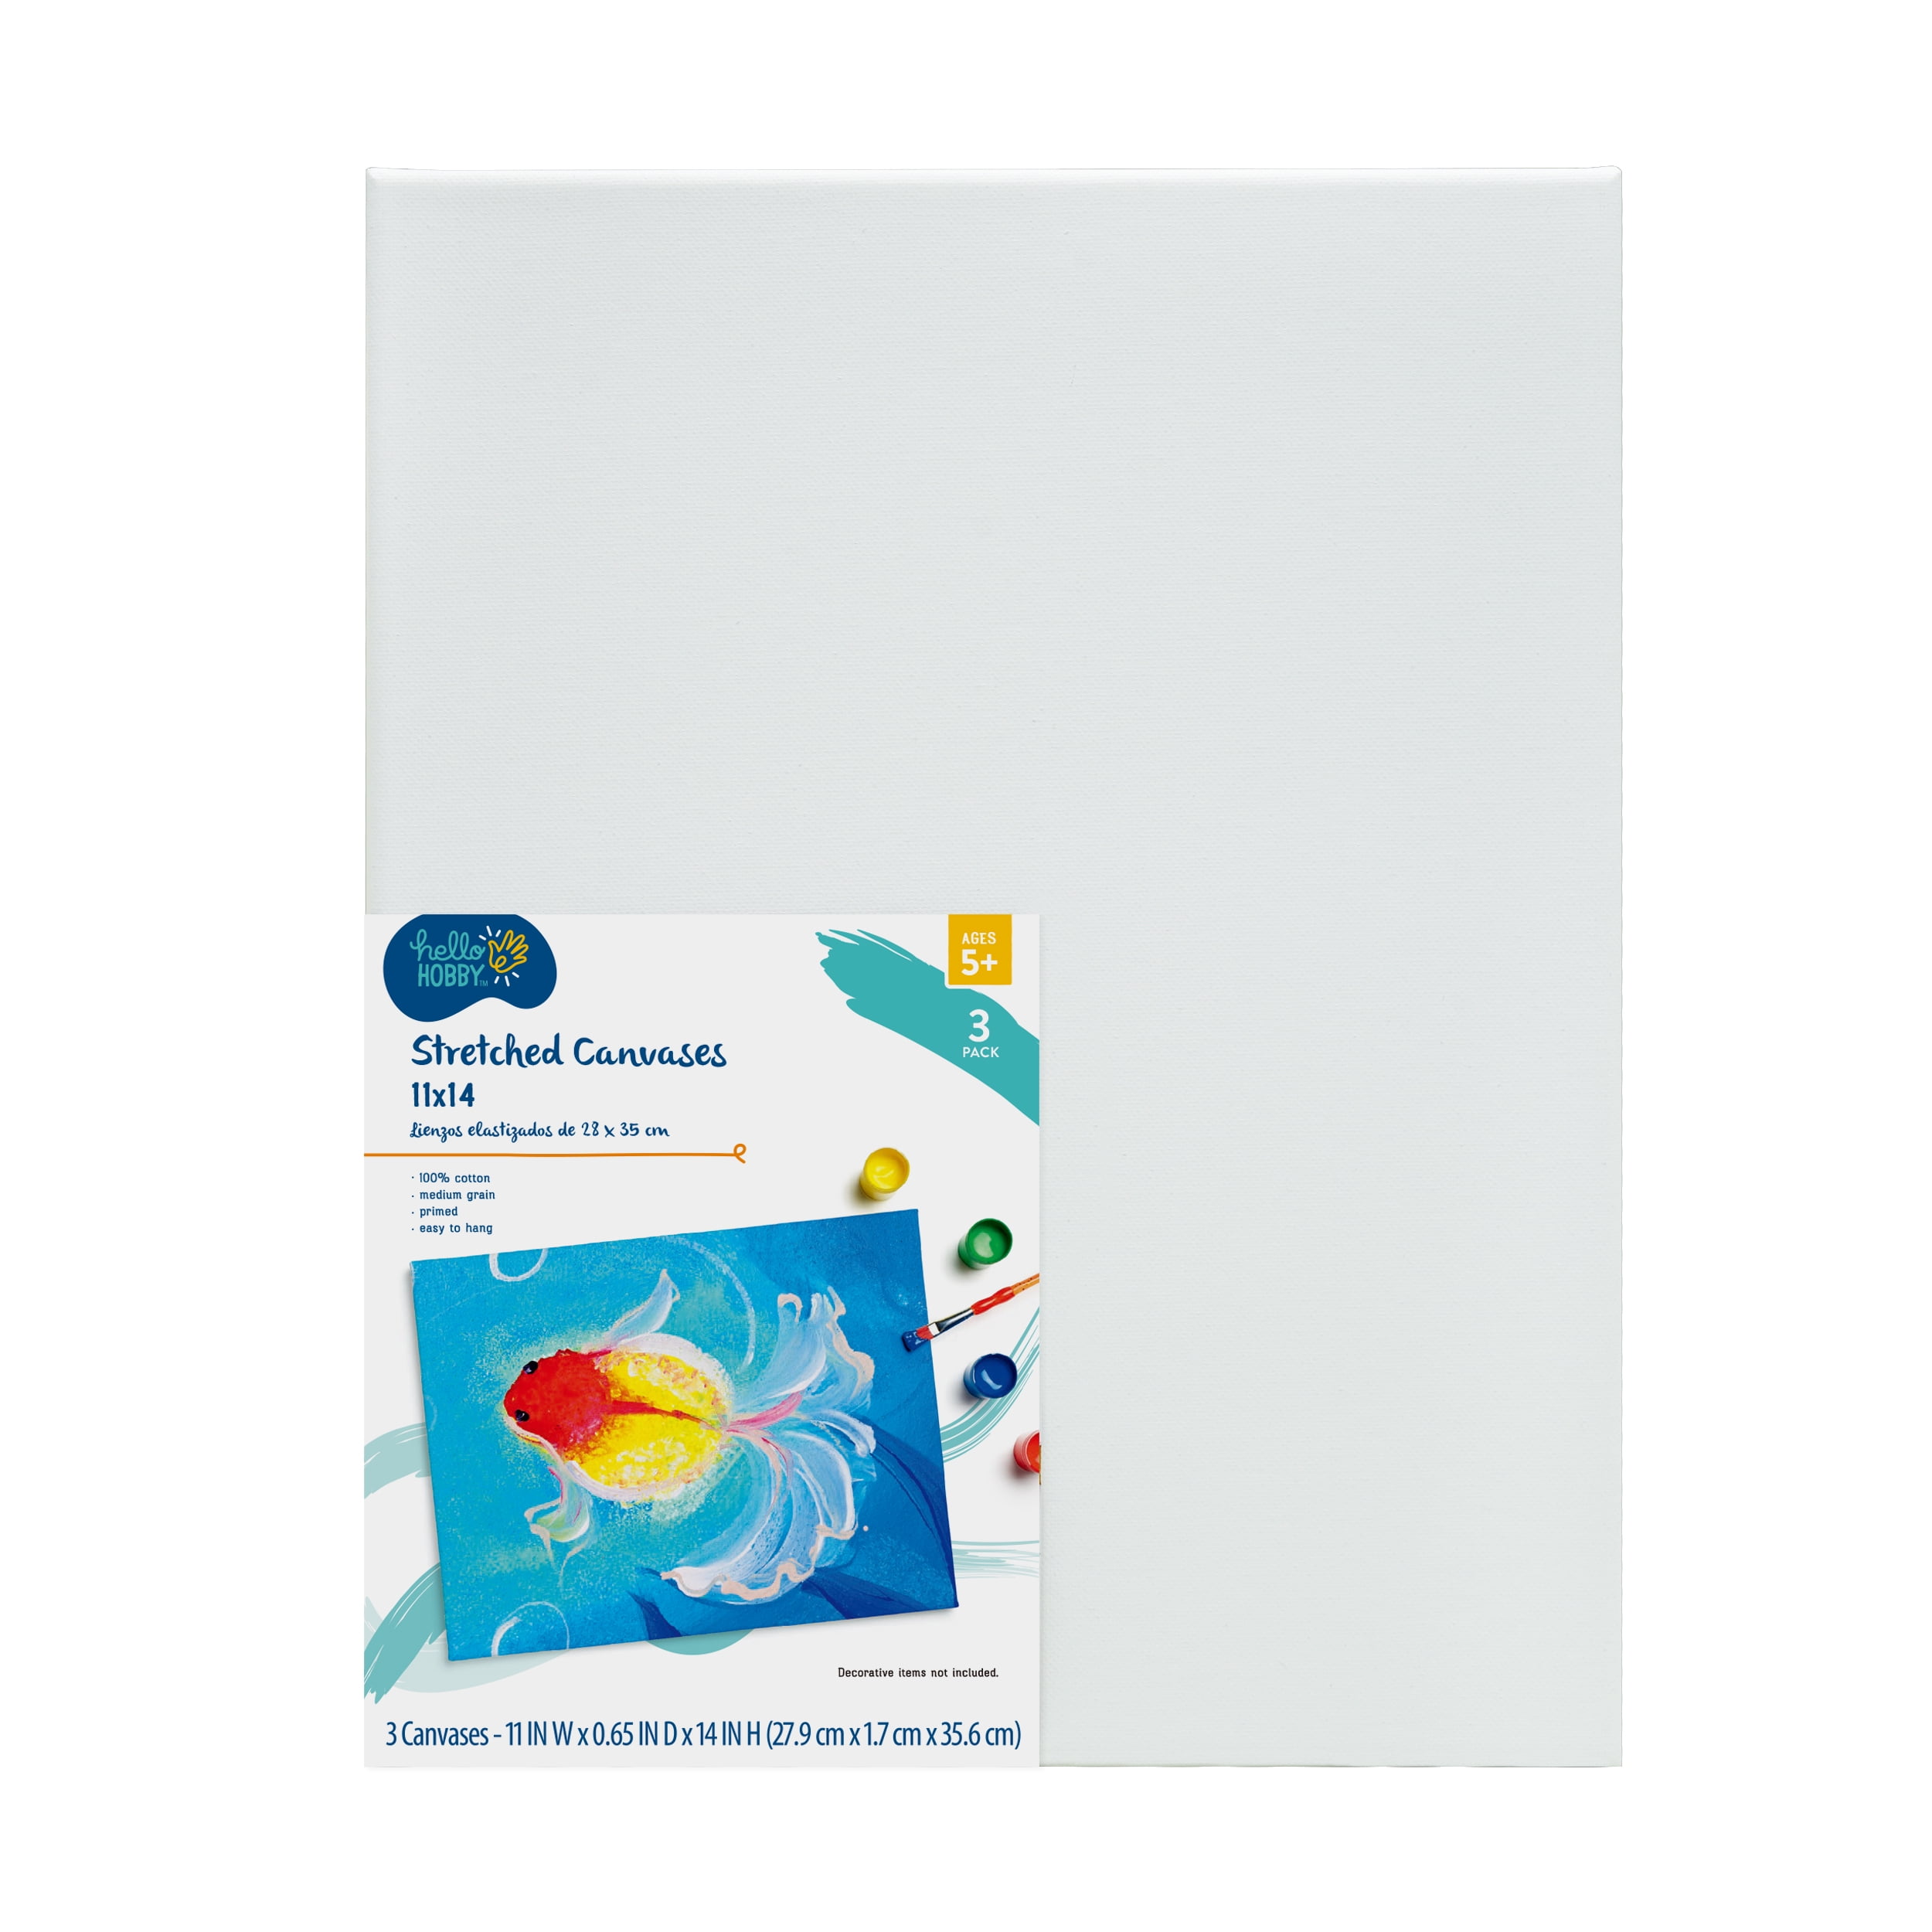  KINGART Canvases for Painting - 18 x 24 Inch, 4 Pack Stretch  Canvases - 10 oz Triple Primed, Acid-Free, 100% Cotton Blank Canvas - Art  Canvases for Professionals,Hobby Painters,Students & Kids